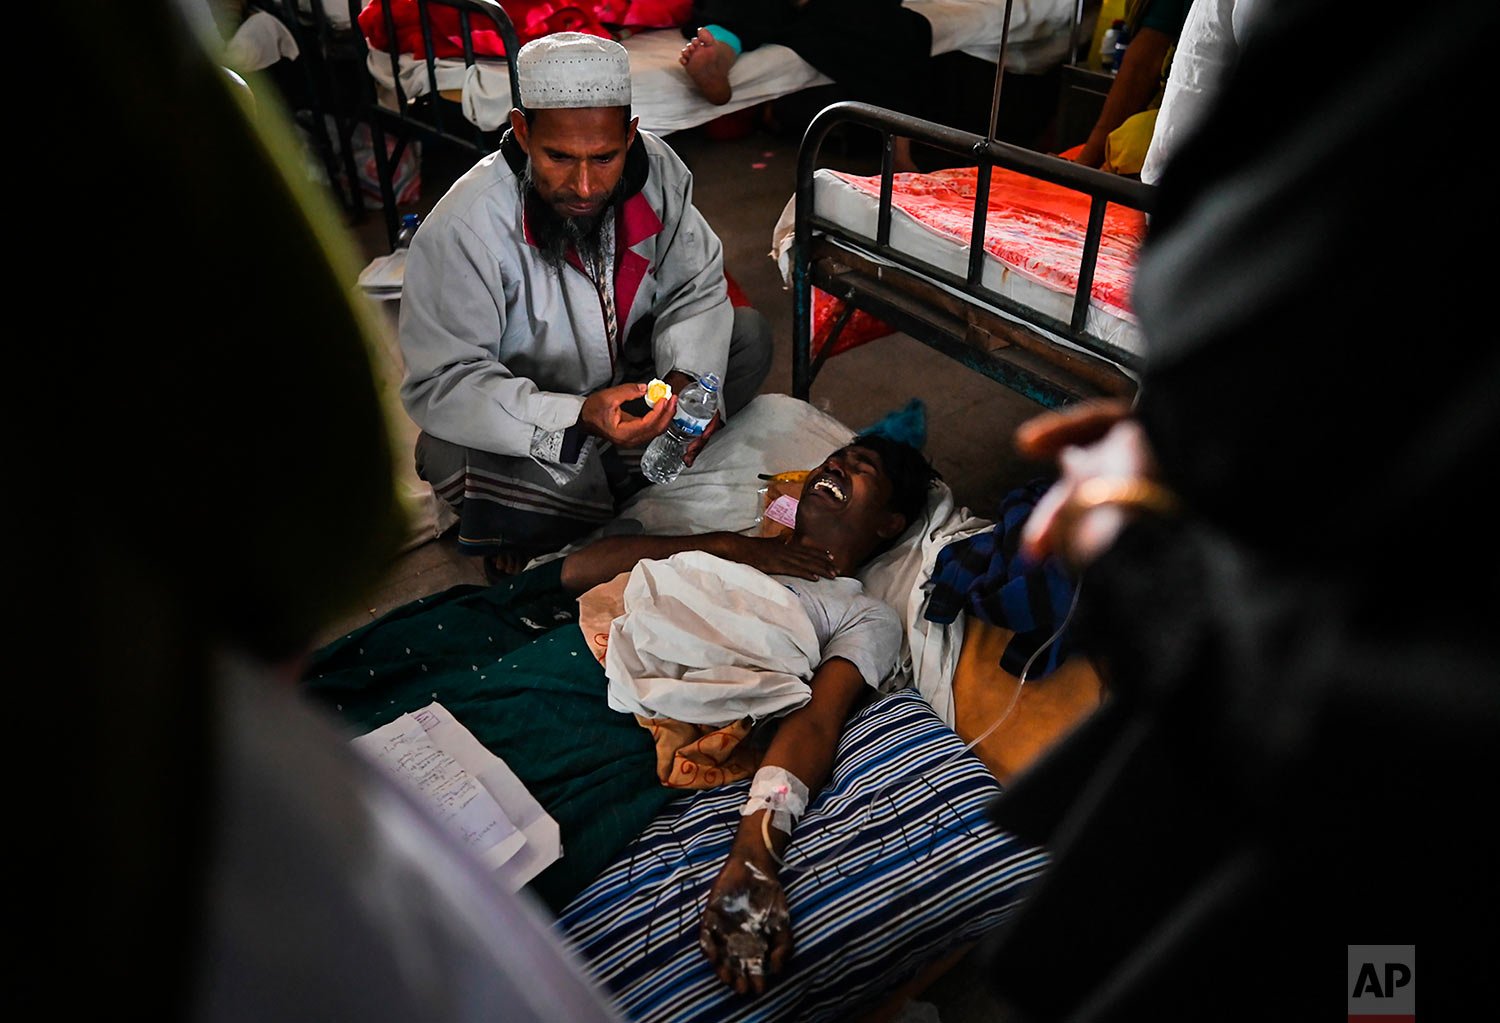  An injured survivor of a ferry fire cries in a pain as he receives treatment at a government medical hospital, in Barishal, Bangladesh, Friday, Dec. 24, 2021.  (AP Photo/Niamul Rifat) 